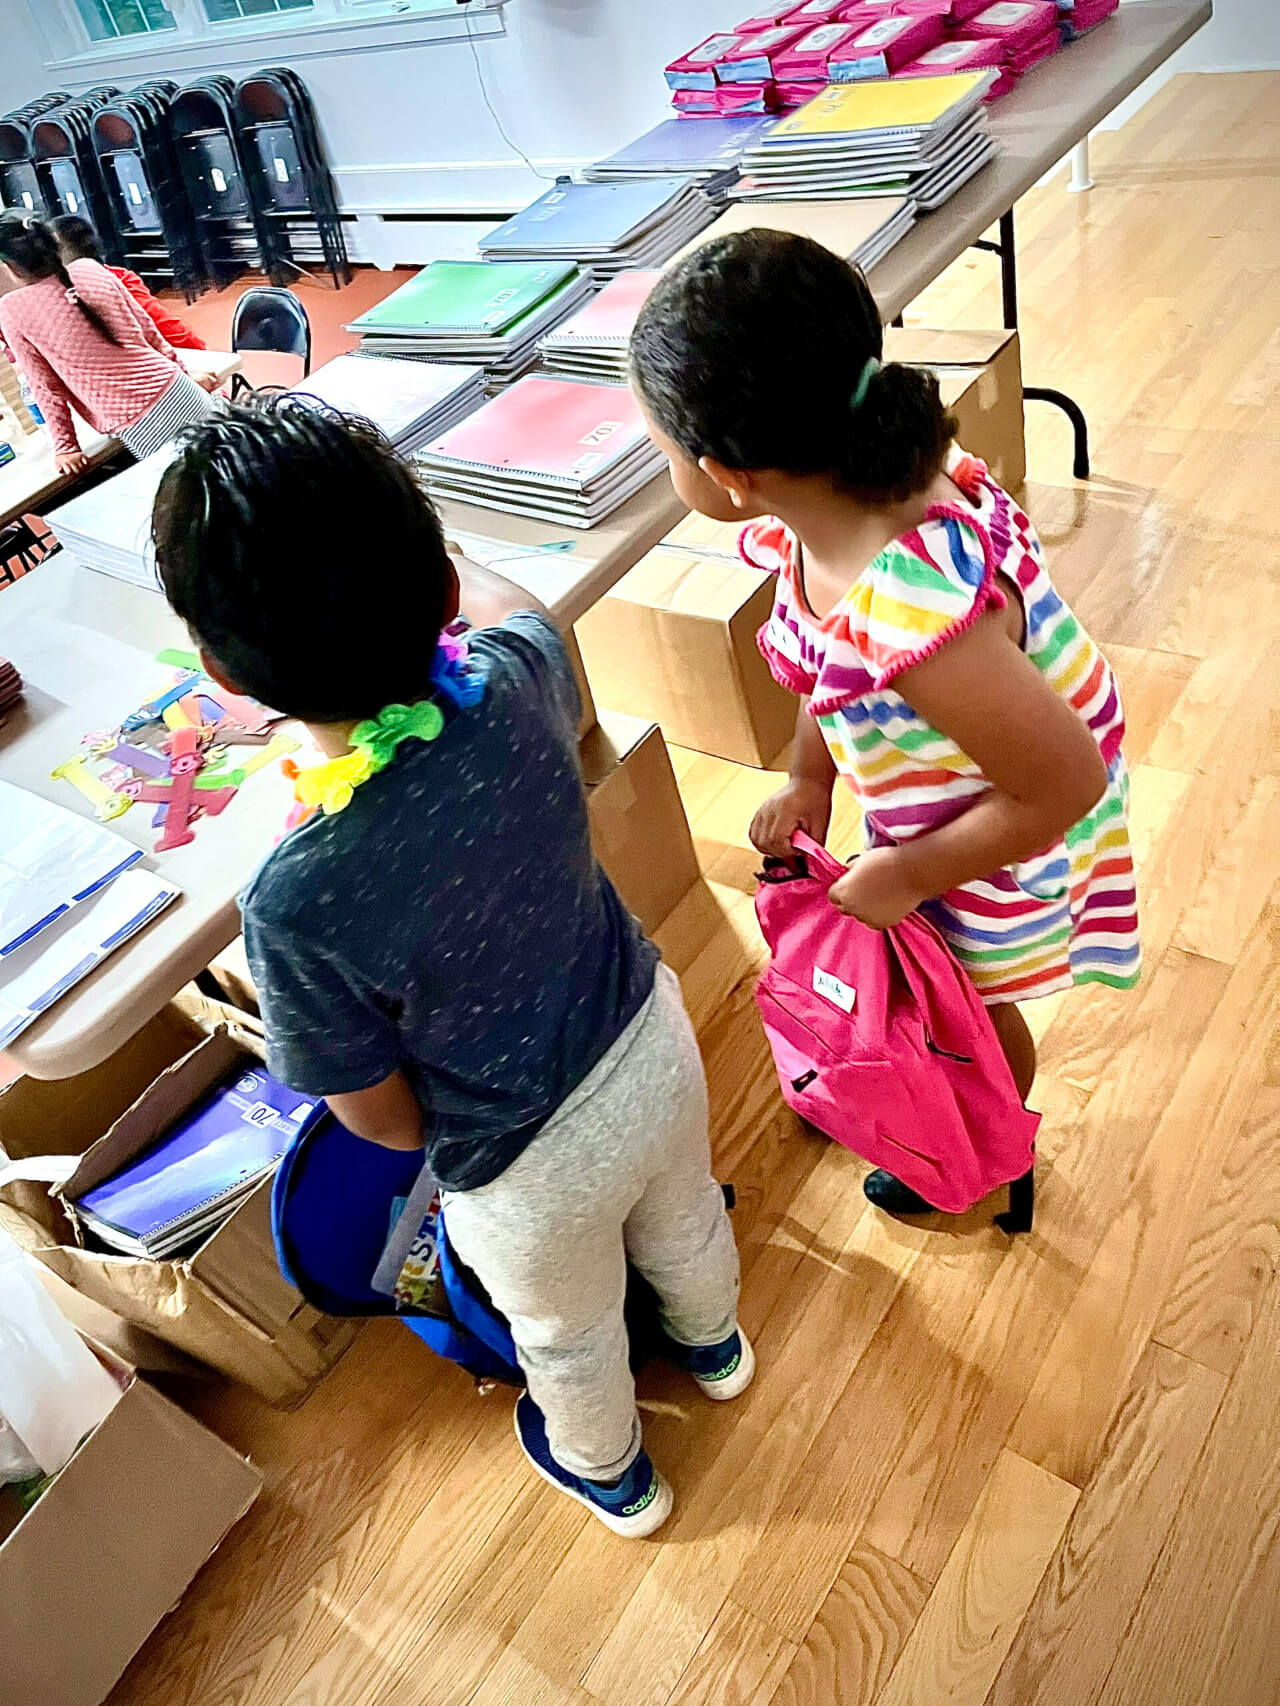 Two children picking up school things on table